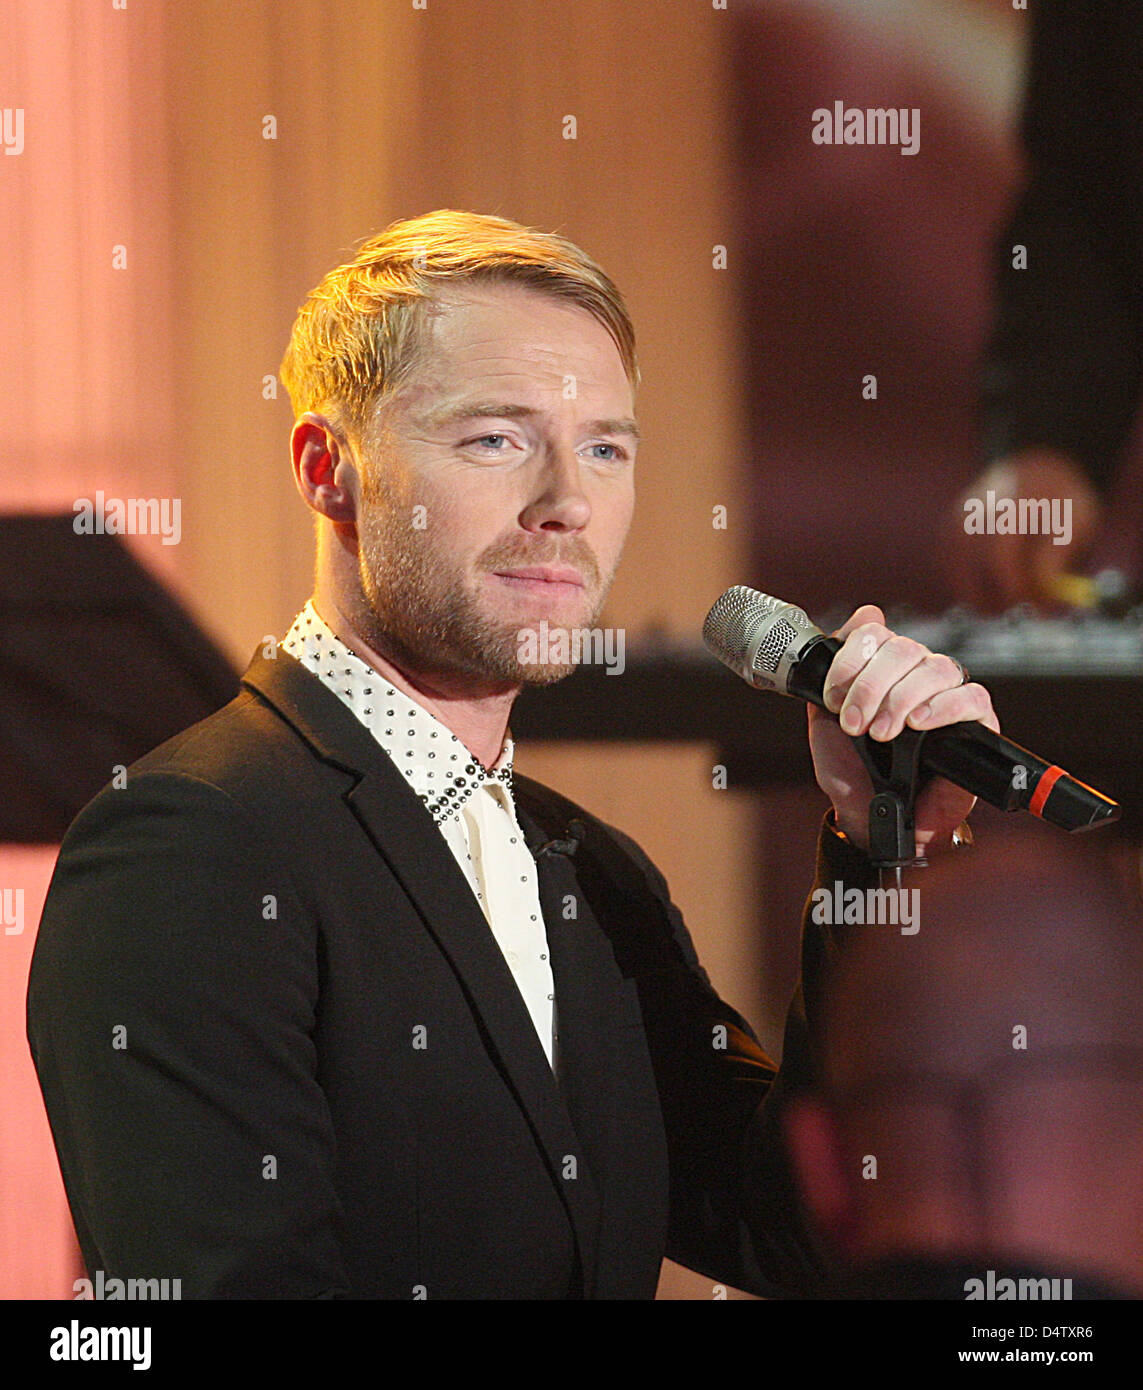 Singer Ronan Keating performs at the German television show 'Die schoensten Weihnachtshits' ('The loveliest Christmas hits'), a show of the German television channel 'ZDF' in Munich, Germany, 02 December 2009. The gala took place for the benefit of the German aid organisations 'Misereor' and 'Brot fuer die Welt' ('Bread for the world'). Both aid organisations provide assistance for Stock Photo